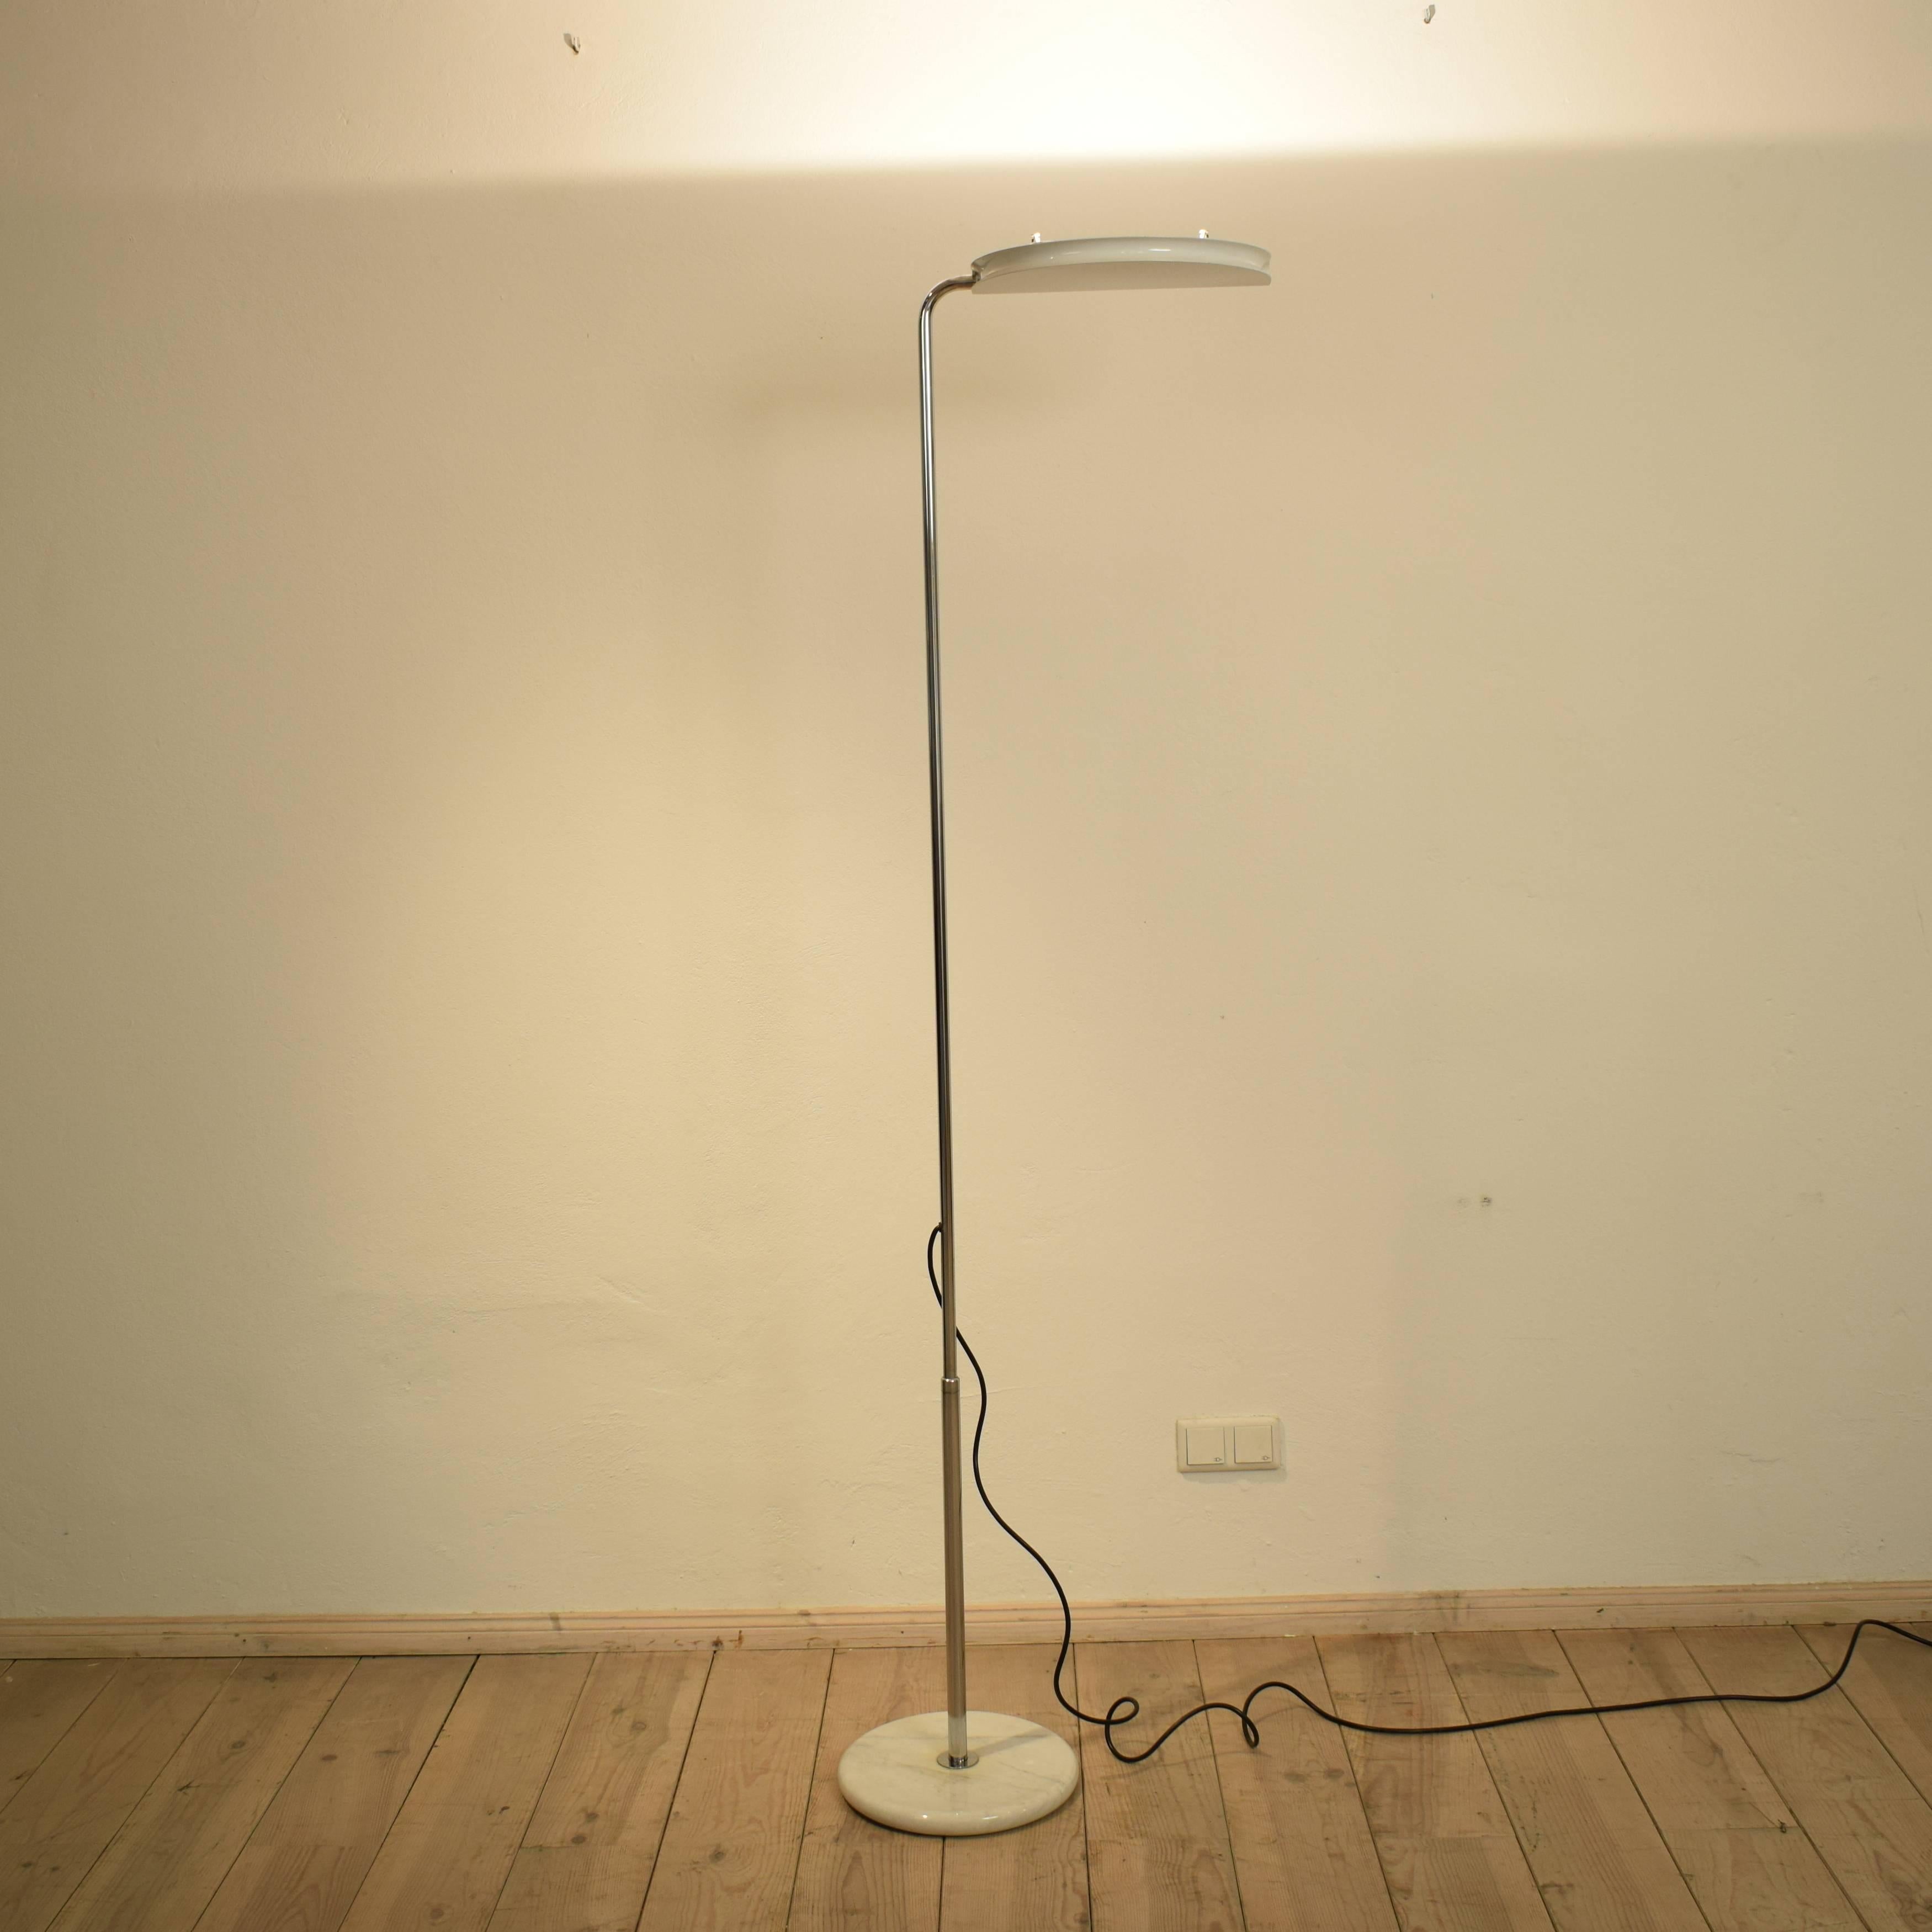 This beautiful floor lamp was produced by Skipper and designed by Bruno Gecchelin in the 1970s.
Die lamp is made out of chrome, lacquered metal and has got a marble base. The lamp is rotatable and can light in different directions. It also can be